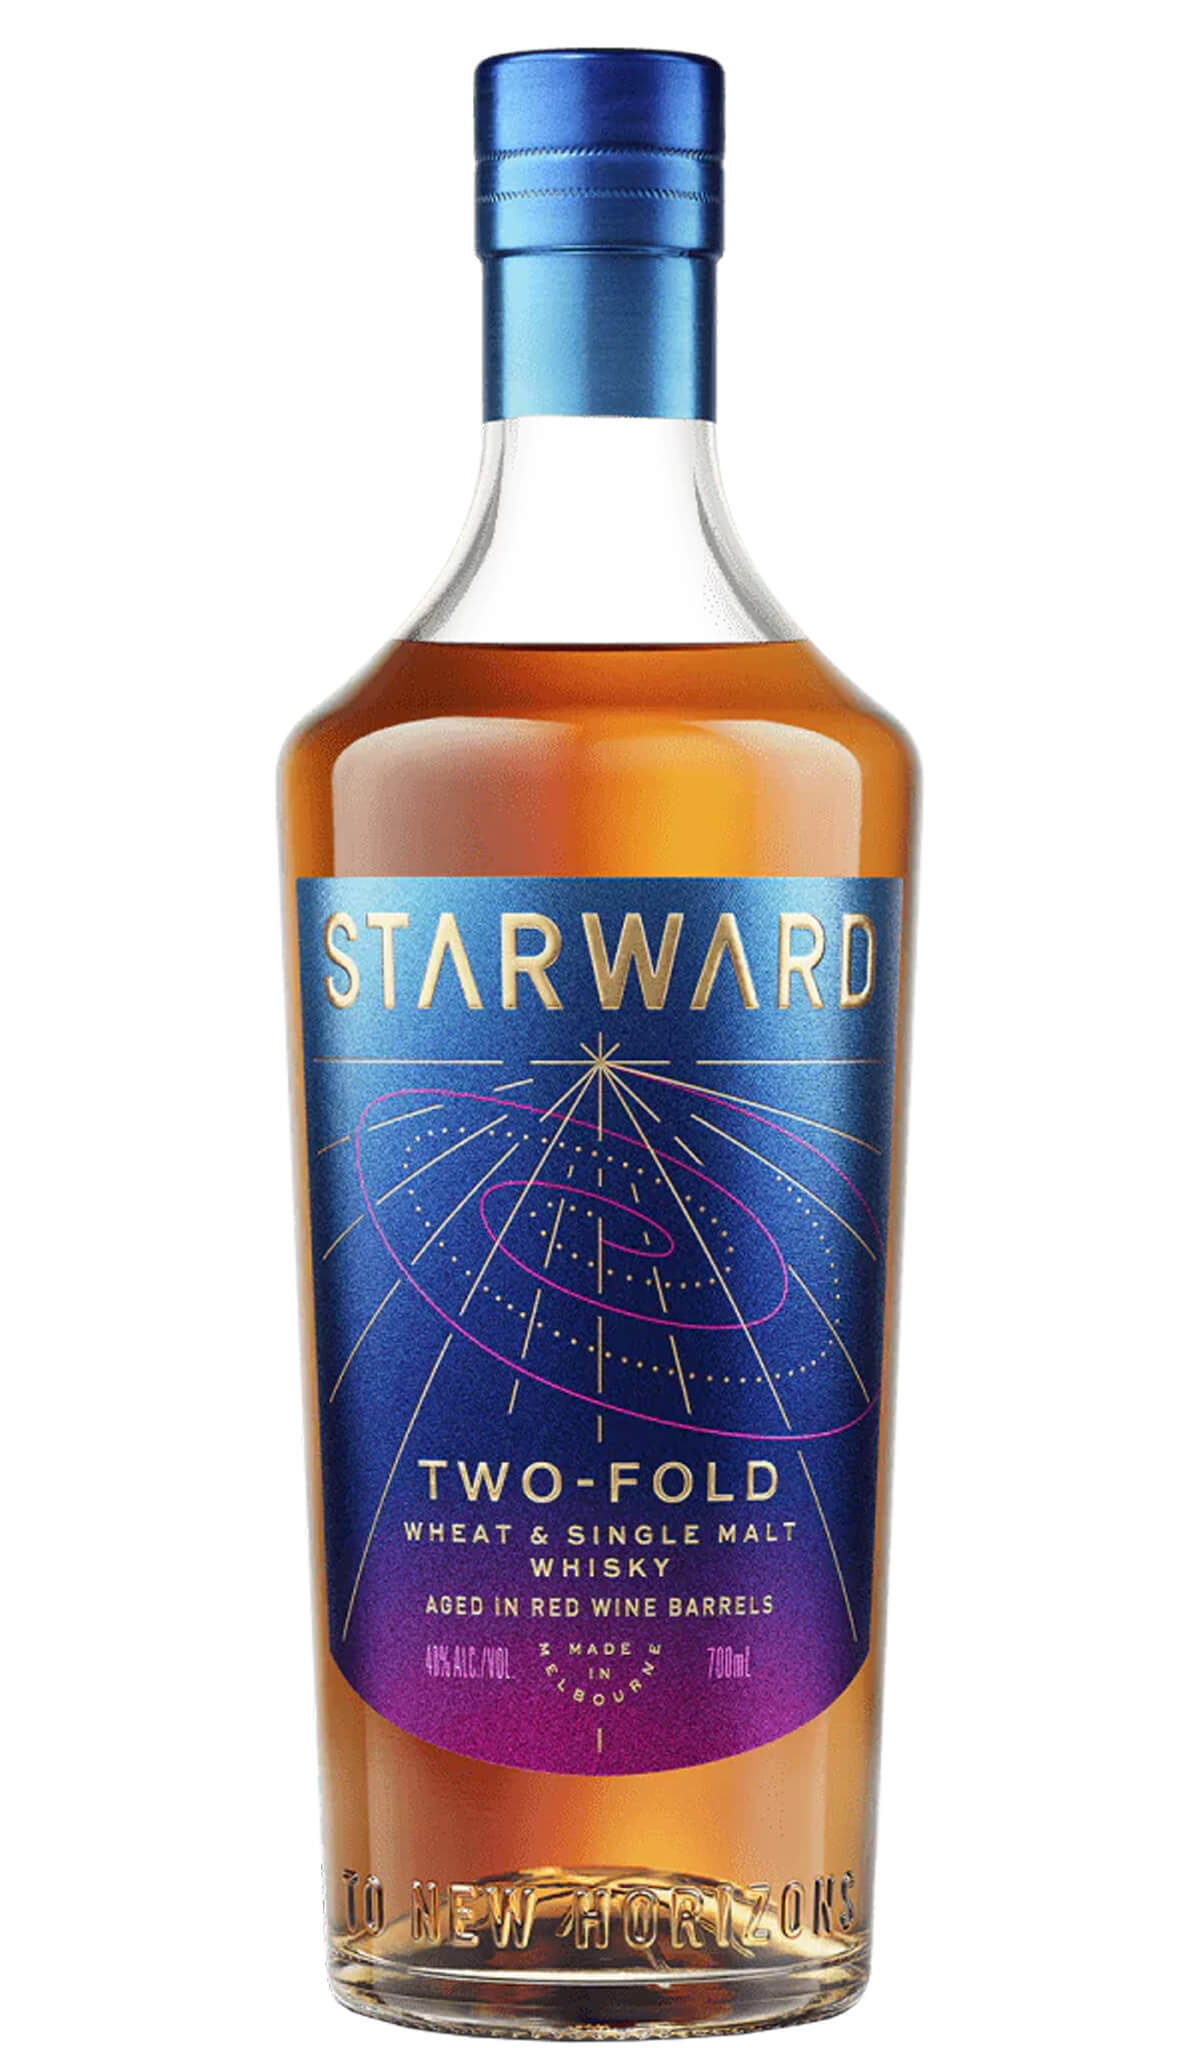 Find out more or buy Starward Two-Fold Double Grain Australian Whisky 700mL online at Wine Sellers Direct - Australia’s independent liquor specialists.